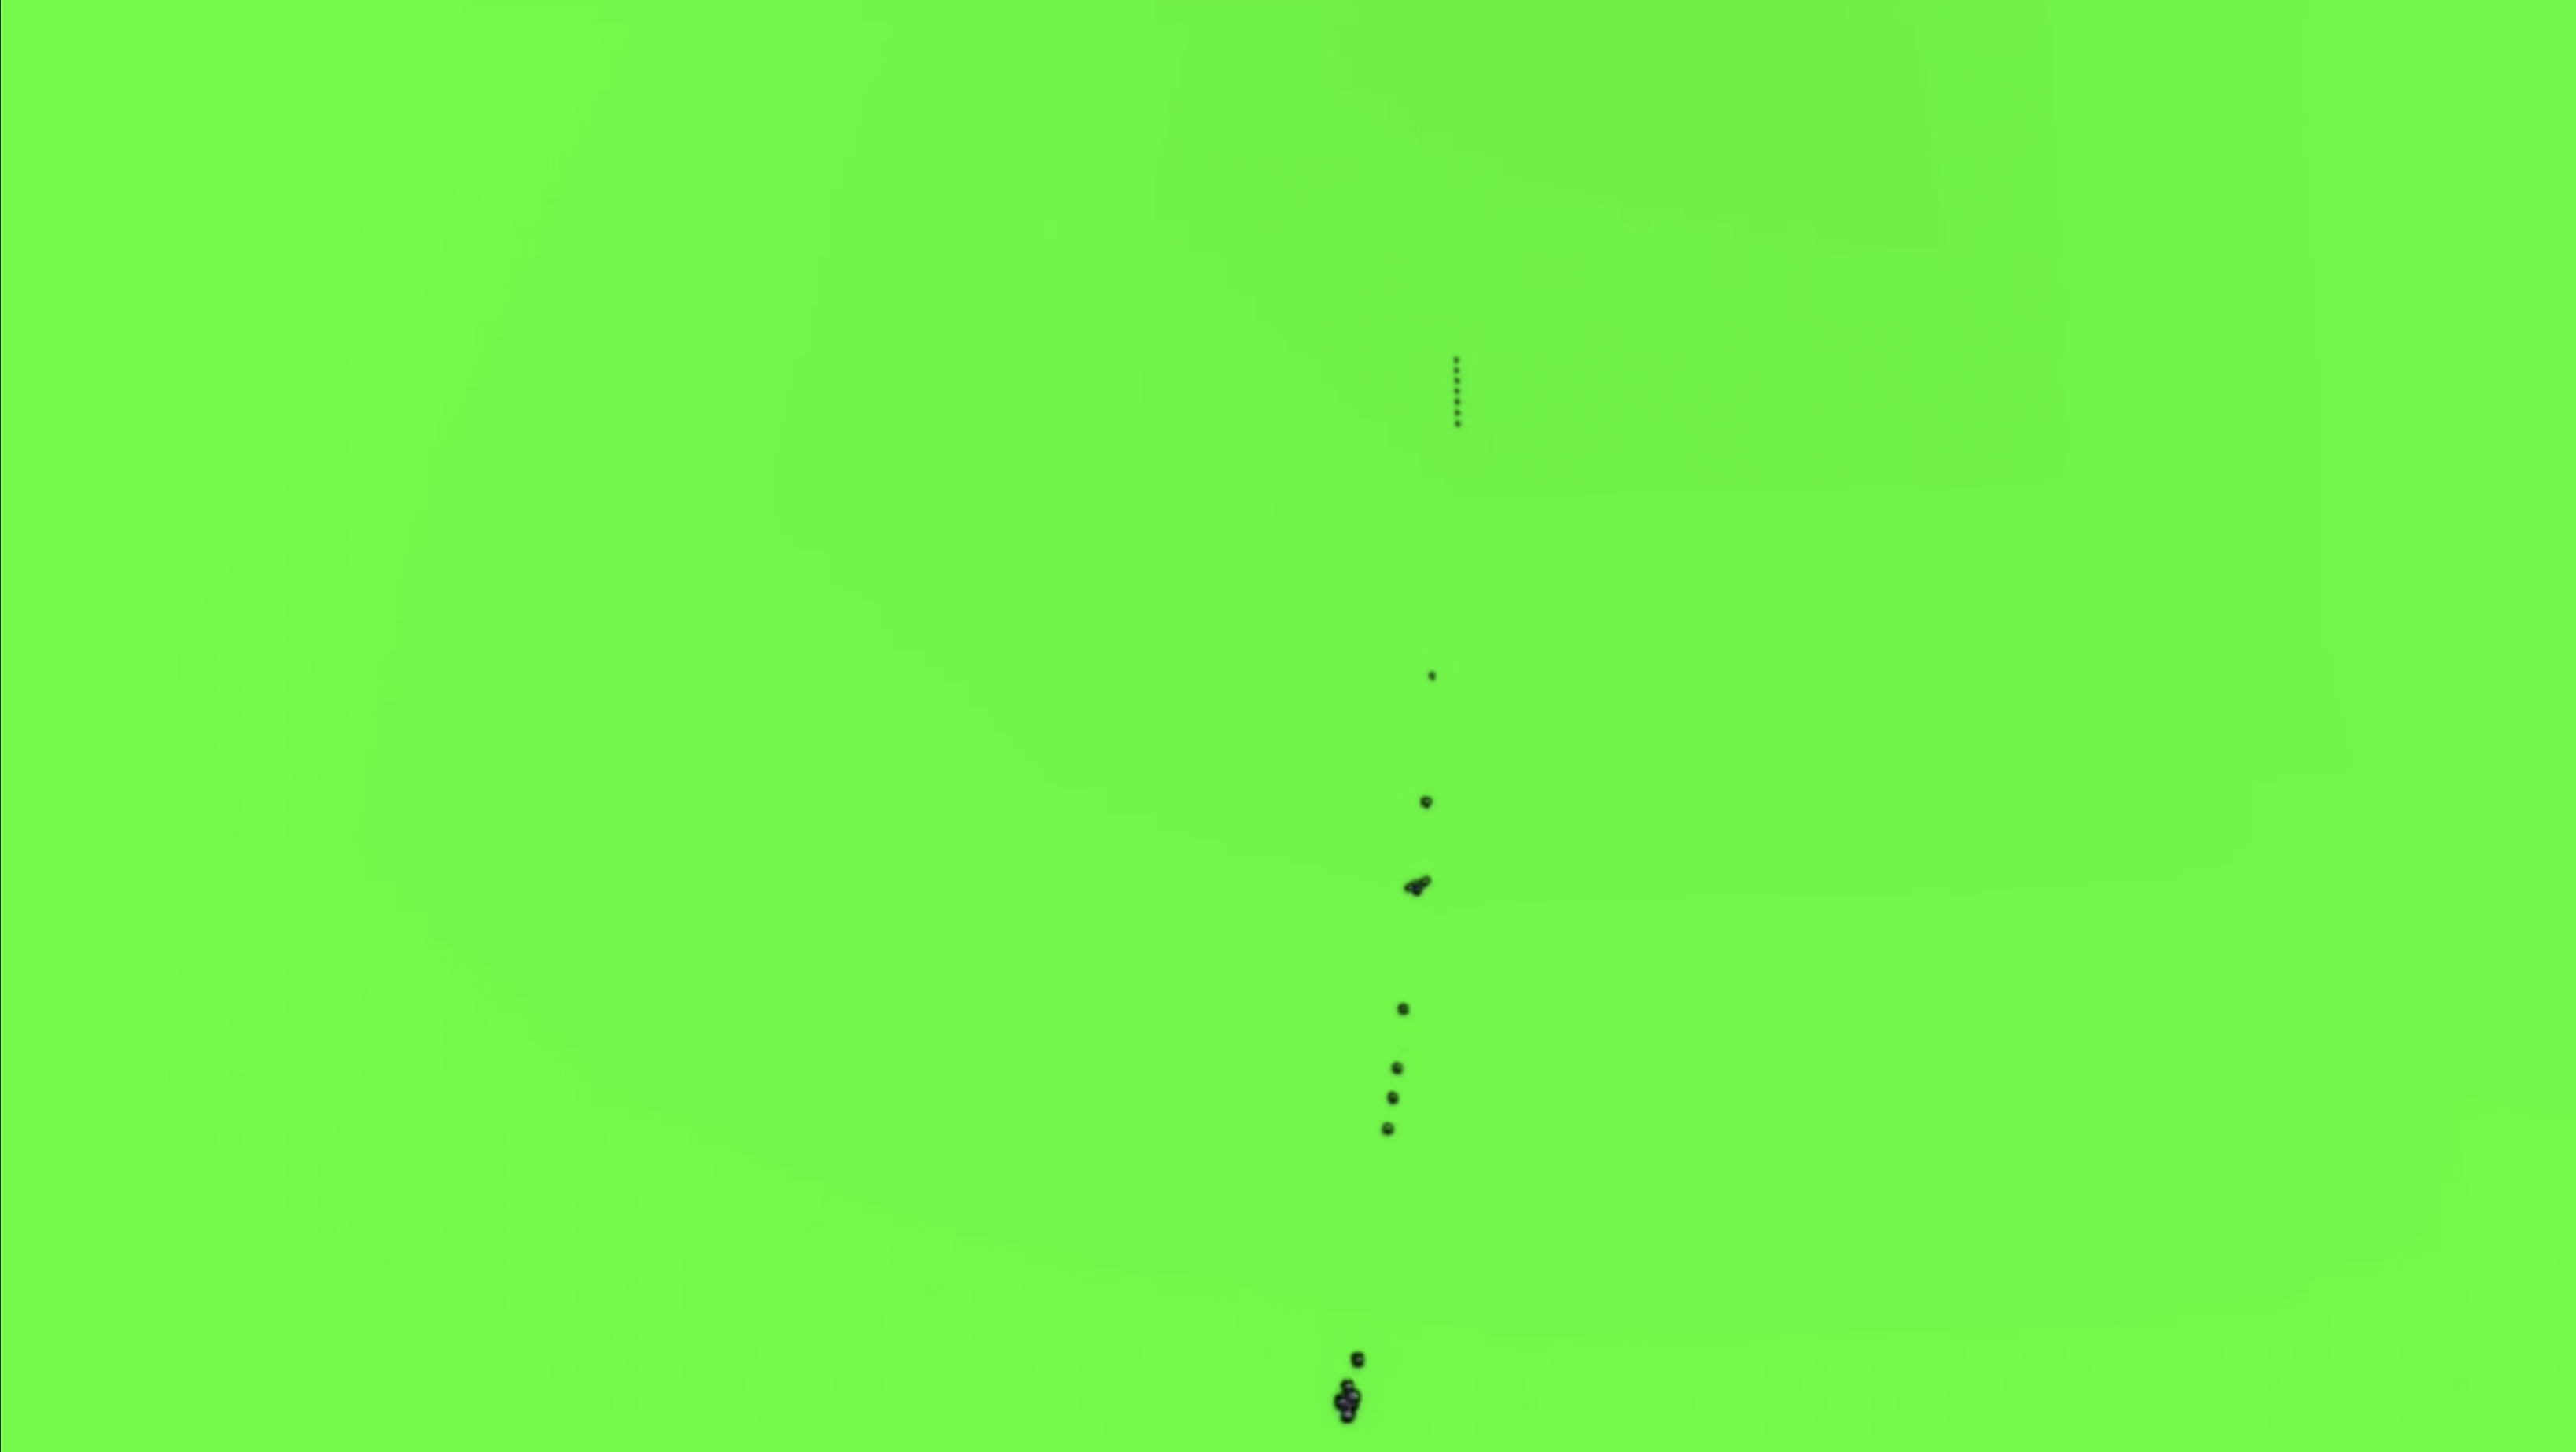 A rectangular video still from the film “Try to Forget” by artist Caroline Coolidge which is entirely a bright, artificial green with about twenty small black masses in the center of the frame in a line from top to bottom.